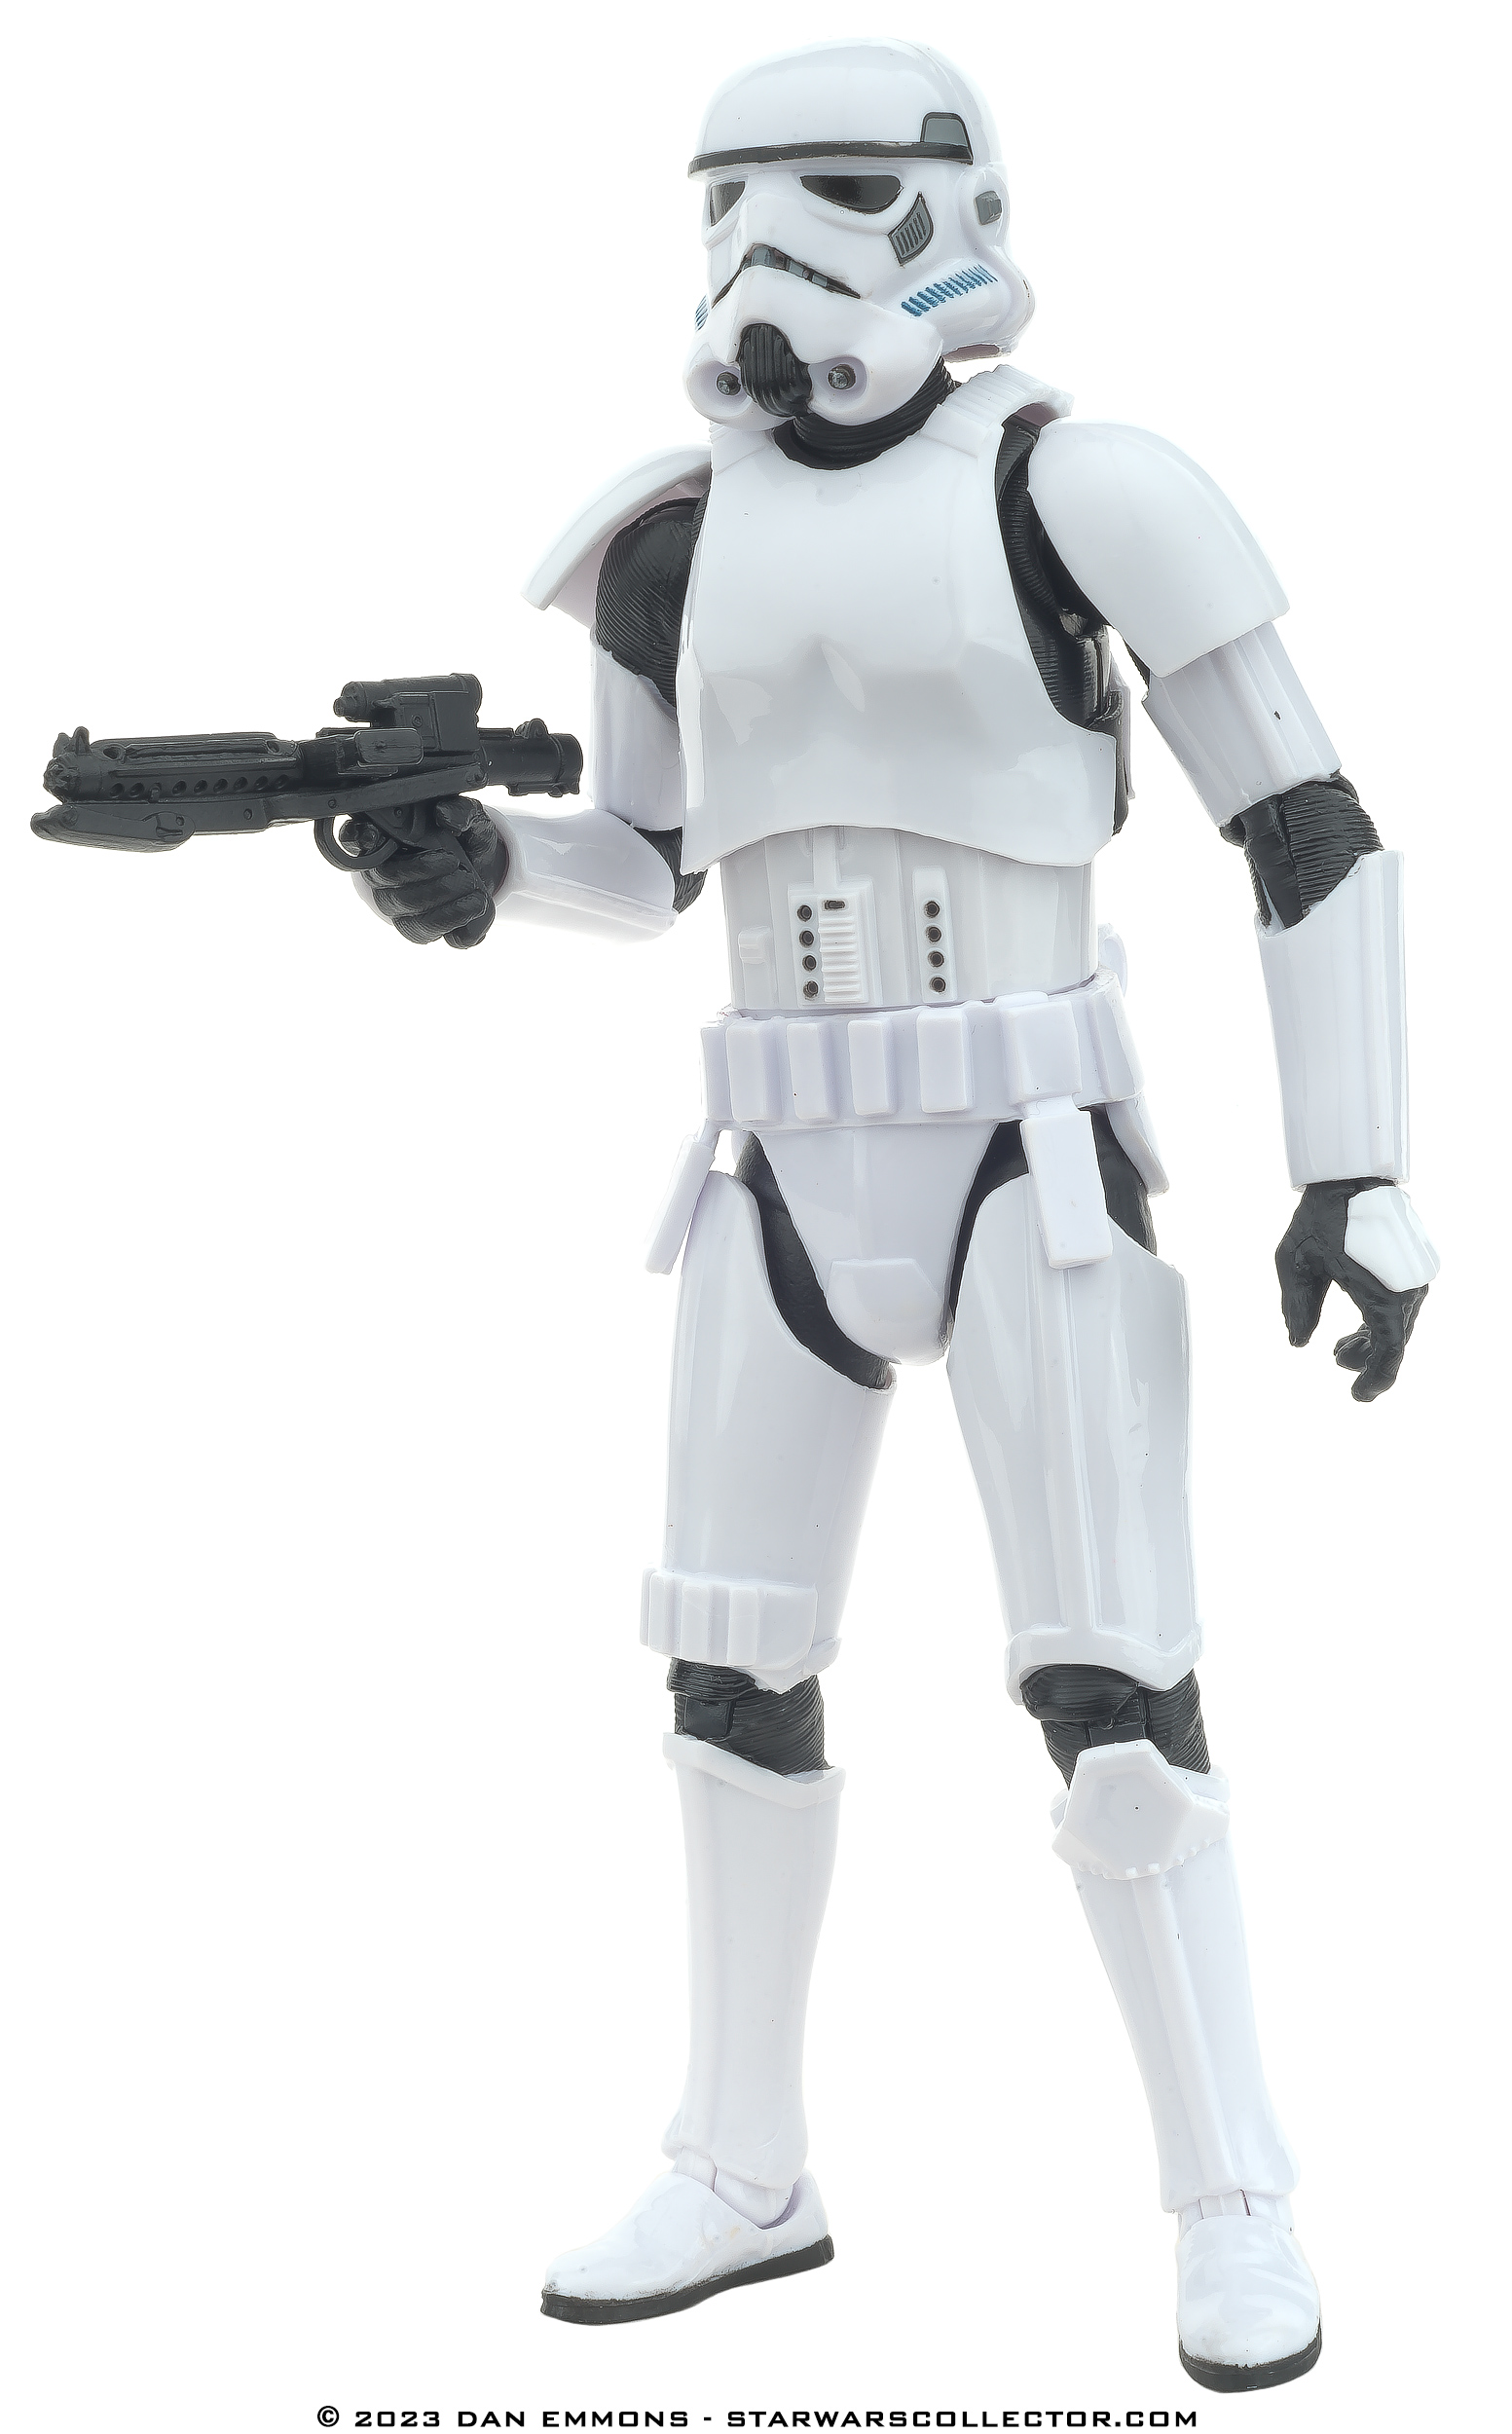 The Black Series 40th Anniversary 6-Inch Stormtrooper